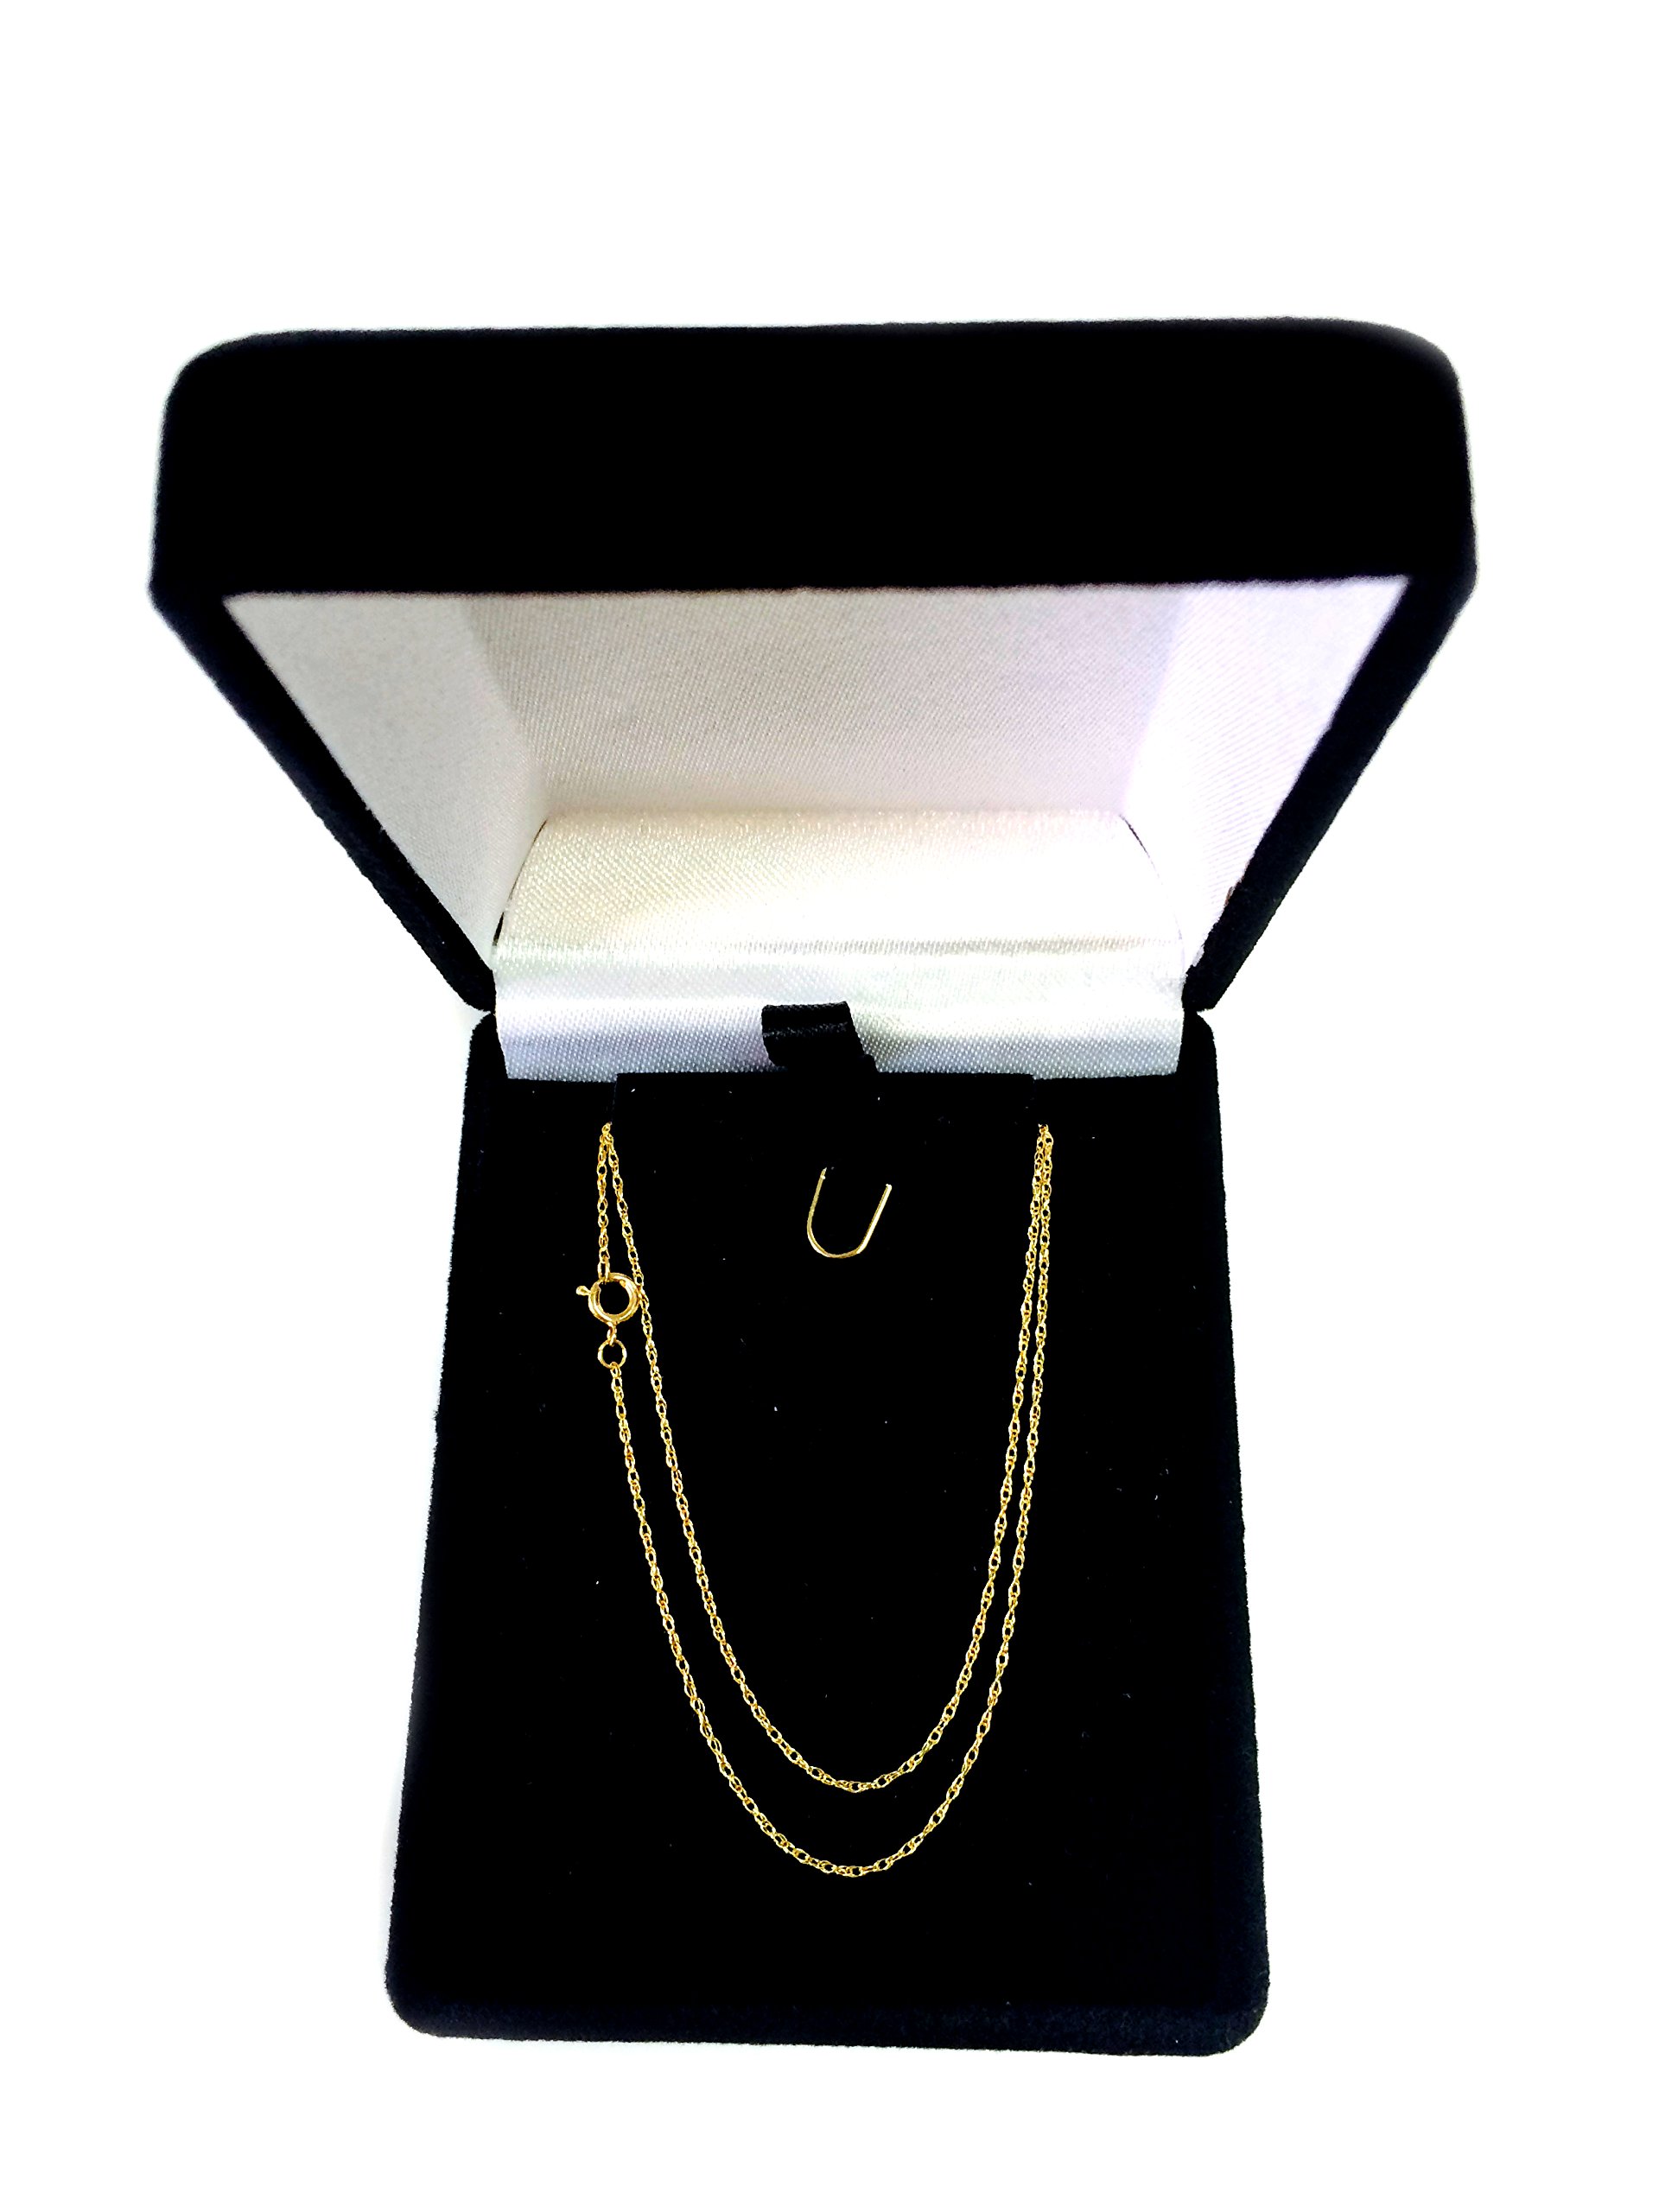 Jewelry Affairs 14k Yellow Gold Rope Chain Necklace, 0.6mm